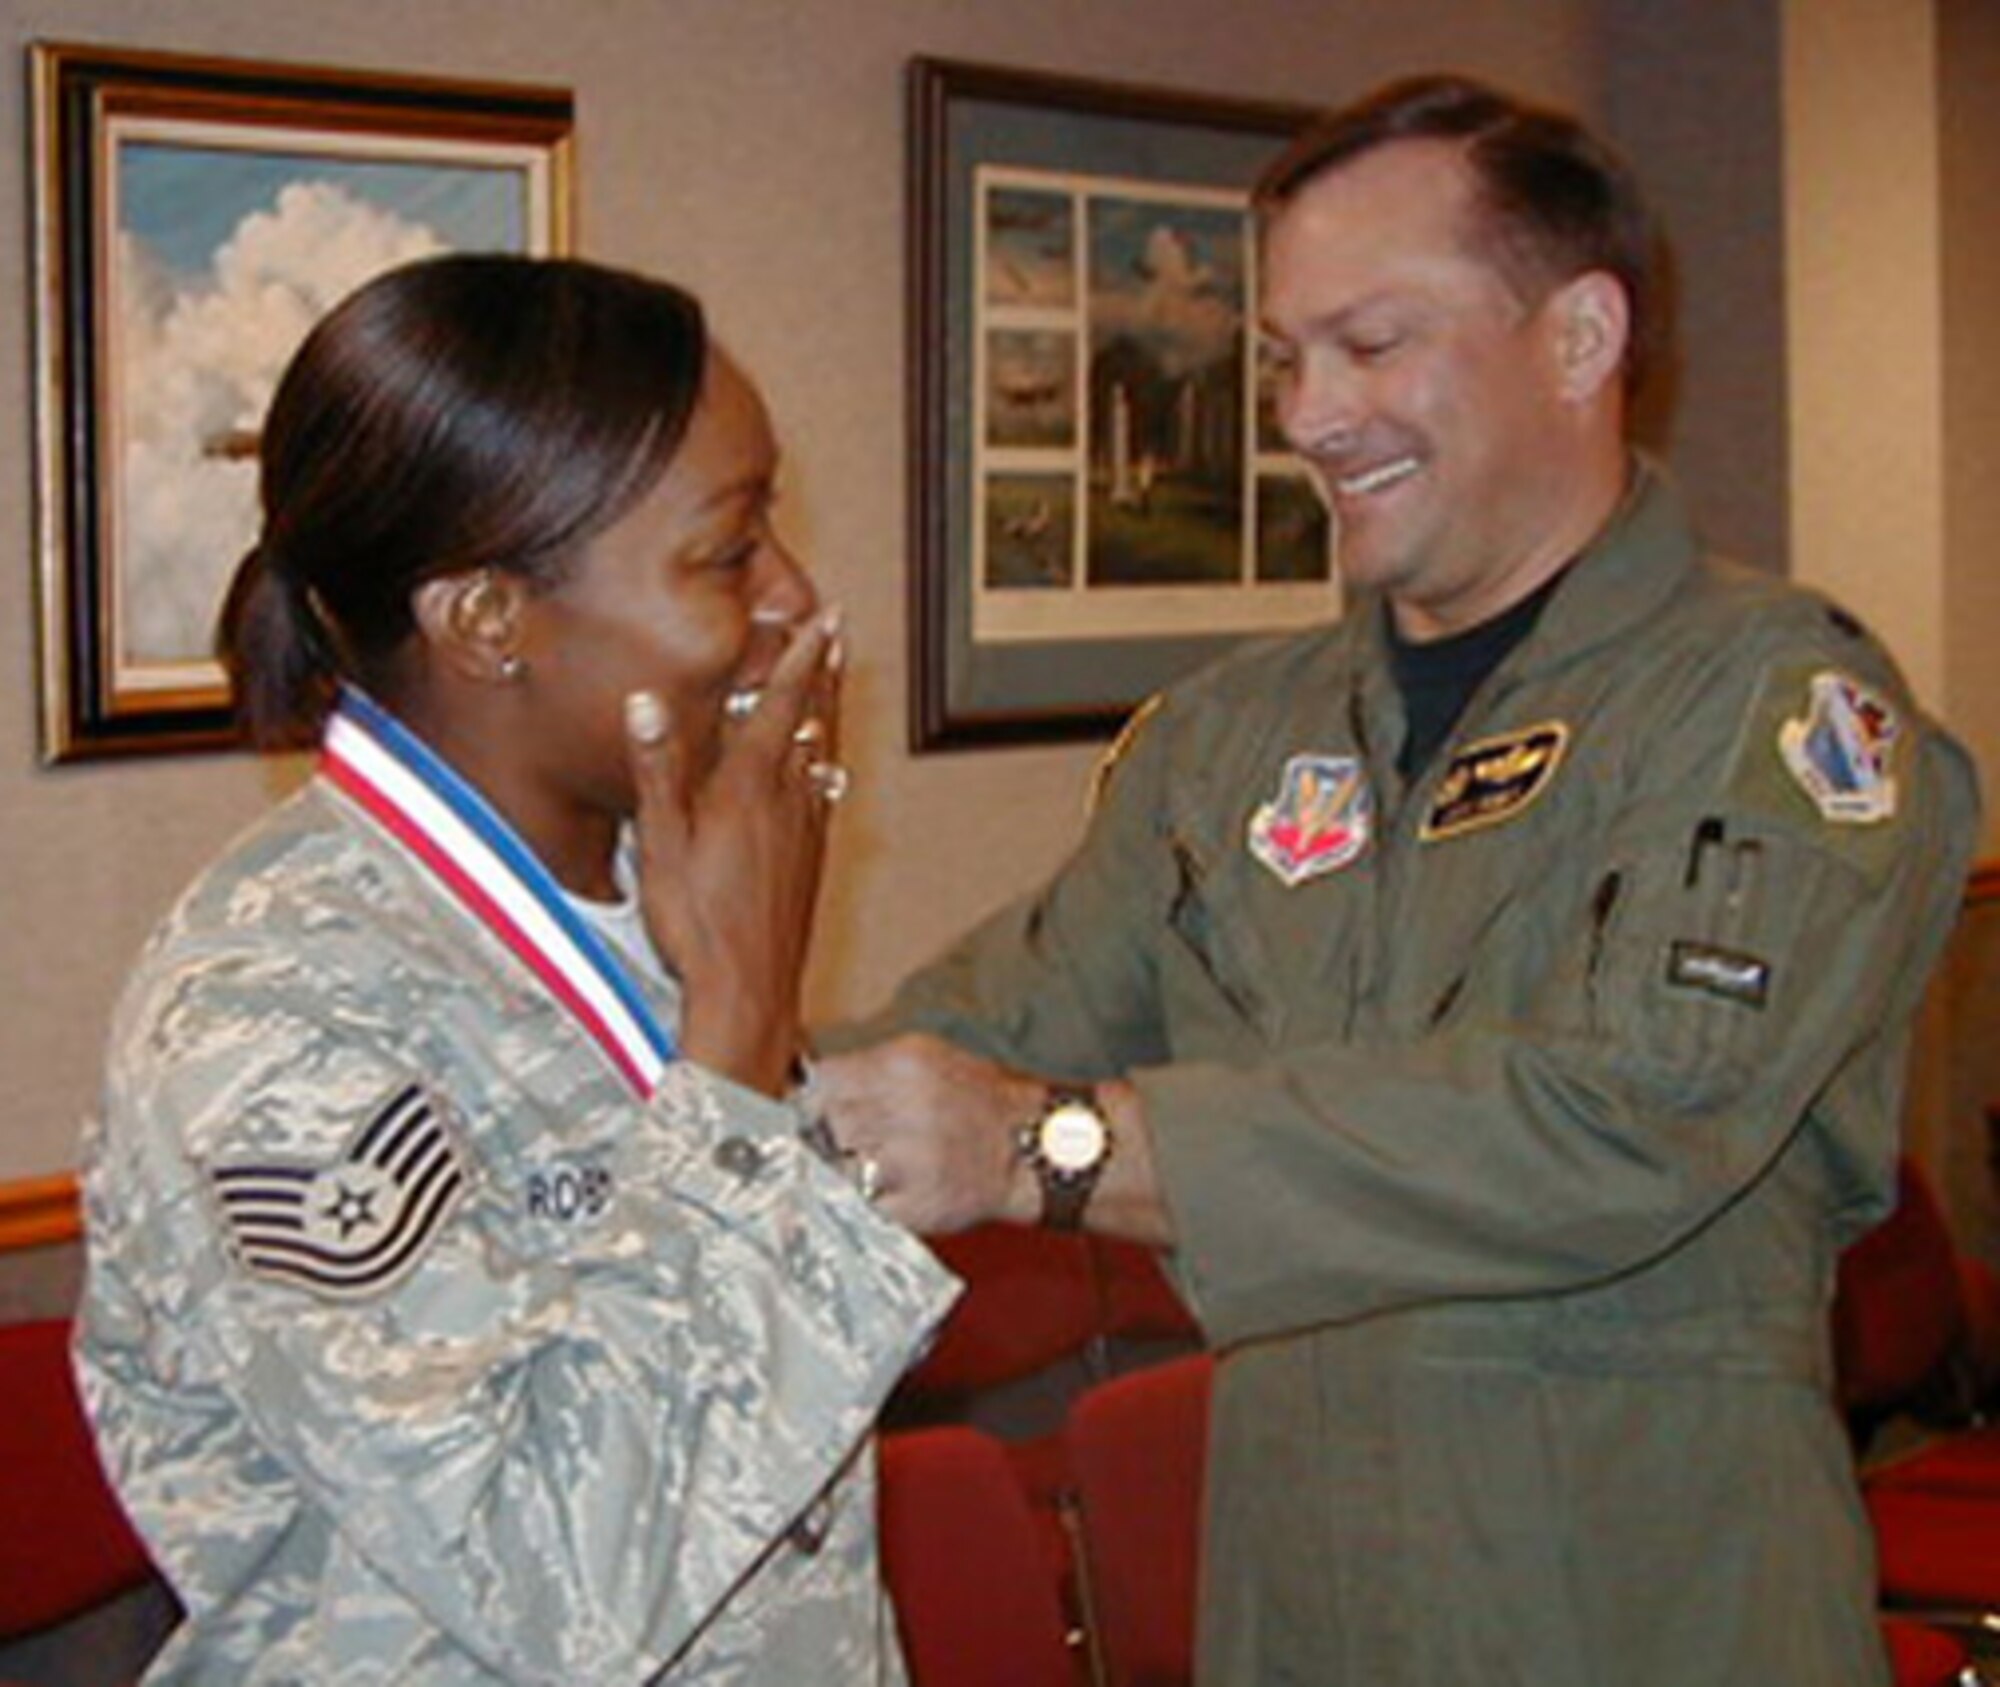 Newly promoted Tech. Sgt. Tanya Robinson, 29th Test Systems Squadron Det. 3, gets her stripes tacked on by Lt. Col. Jack Knight, 29th TSS commander Feb. 5 at Barksdale Air Force Base, La.  Less than a week after returning from a deployment, Sergeant Robinson was attending a commander's call when she was informed of the news.  Her commander, Lt. Col. Tom Silvia, Det. 3 commander, said the promotion was richly deserved.
“Tech. Sgt. Tanya Robinson is the most dedicated NCO I've had the privilege of working with in my 19 years of service," he said.  "She achieved this promotion because her duty performance is simply astounding.  She is the type of NCO our Air Force needs to continue to be the best in the world.” 
U.S. Air Force photo.